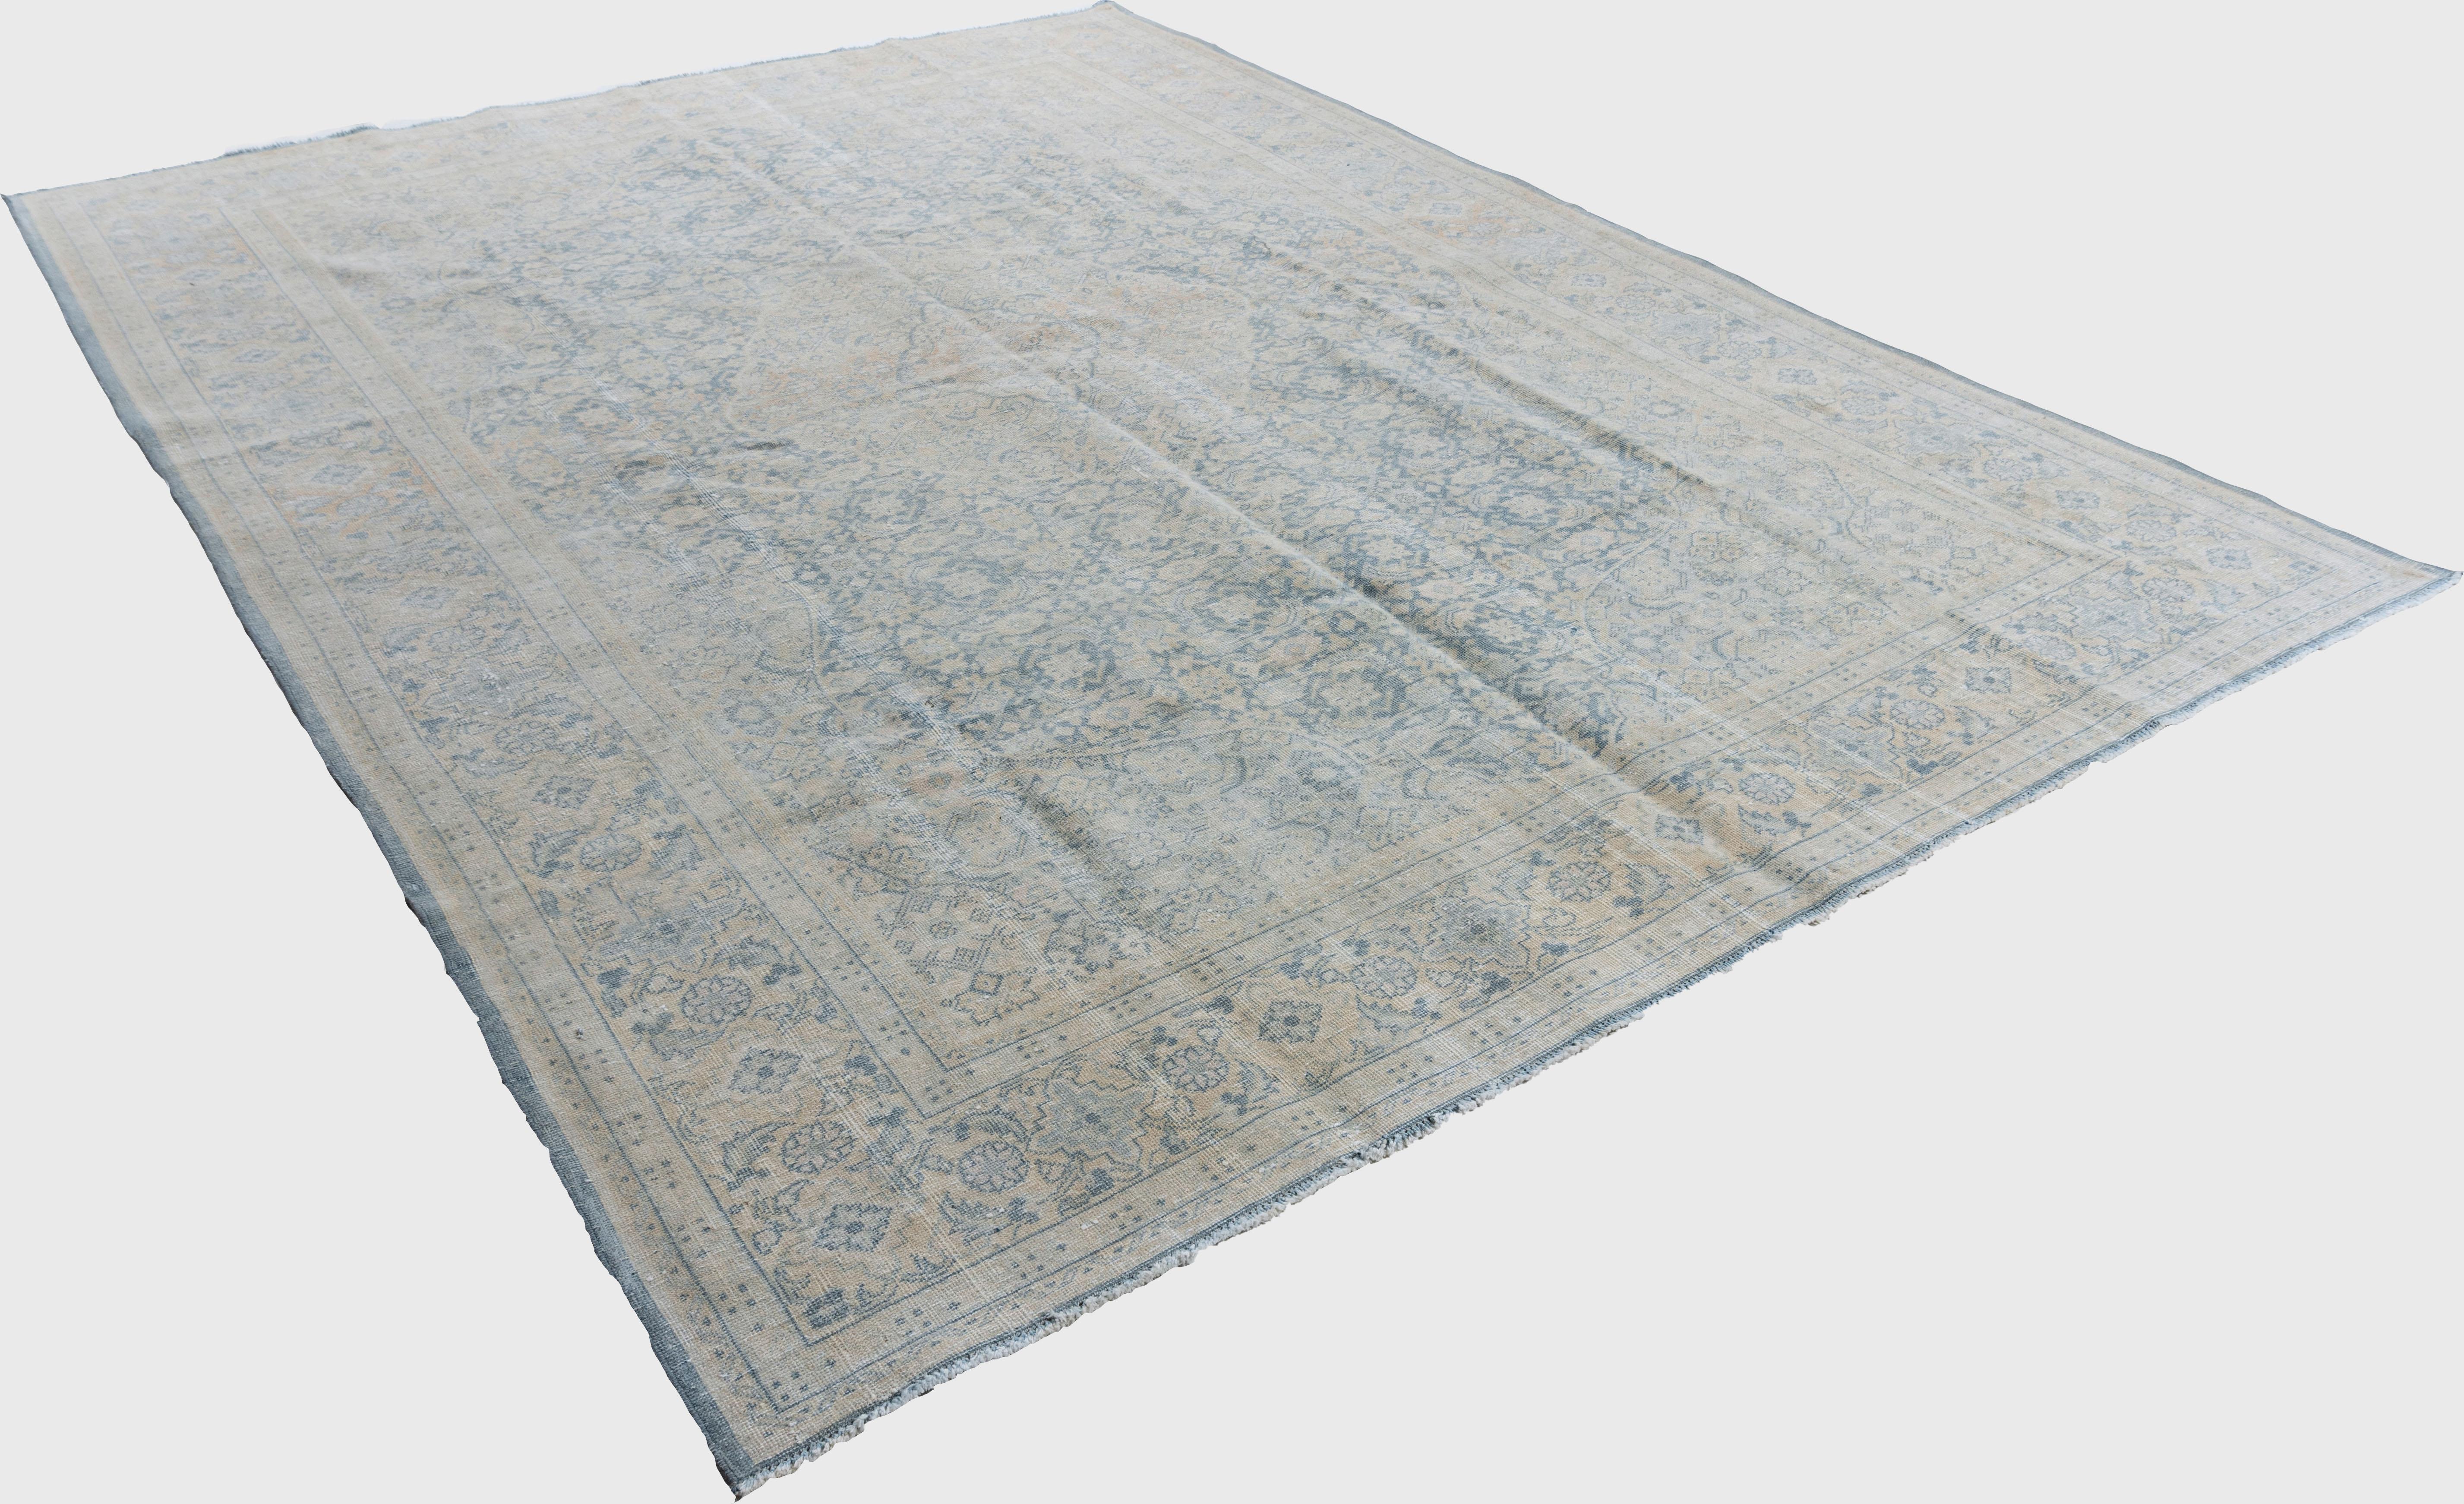 Vintage Lightly Distressed Persian Tabriz rug 7'7 x 10'8. From Tabriz in Persia this is a classic vintage piece that will enhance any room setting. A distressed carpet is not an abused one, but one that has been artfully recreated to follow current